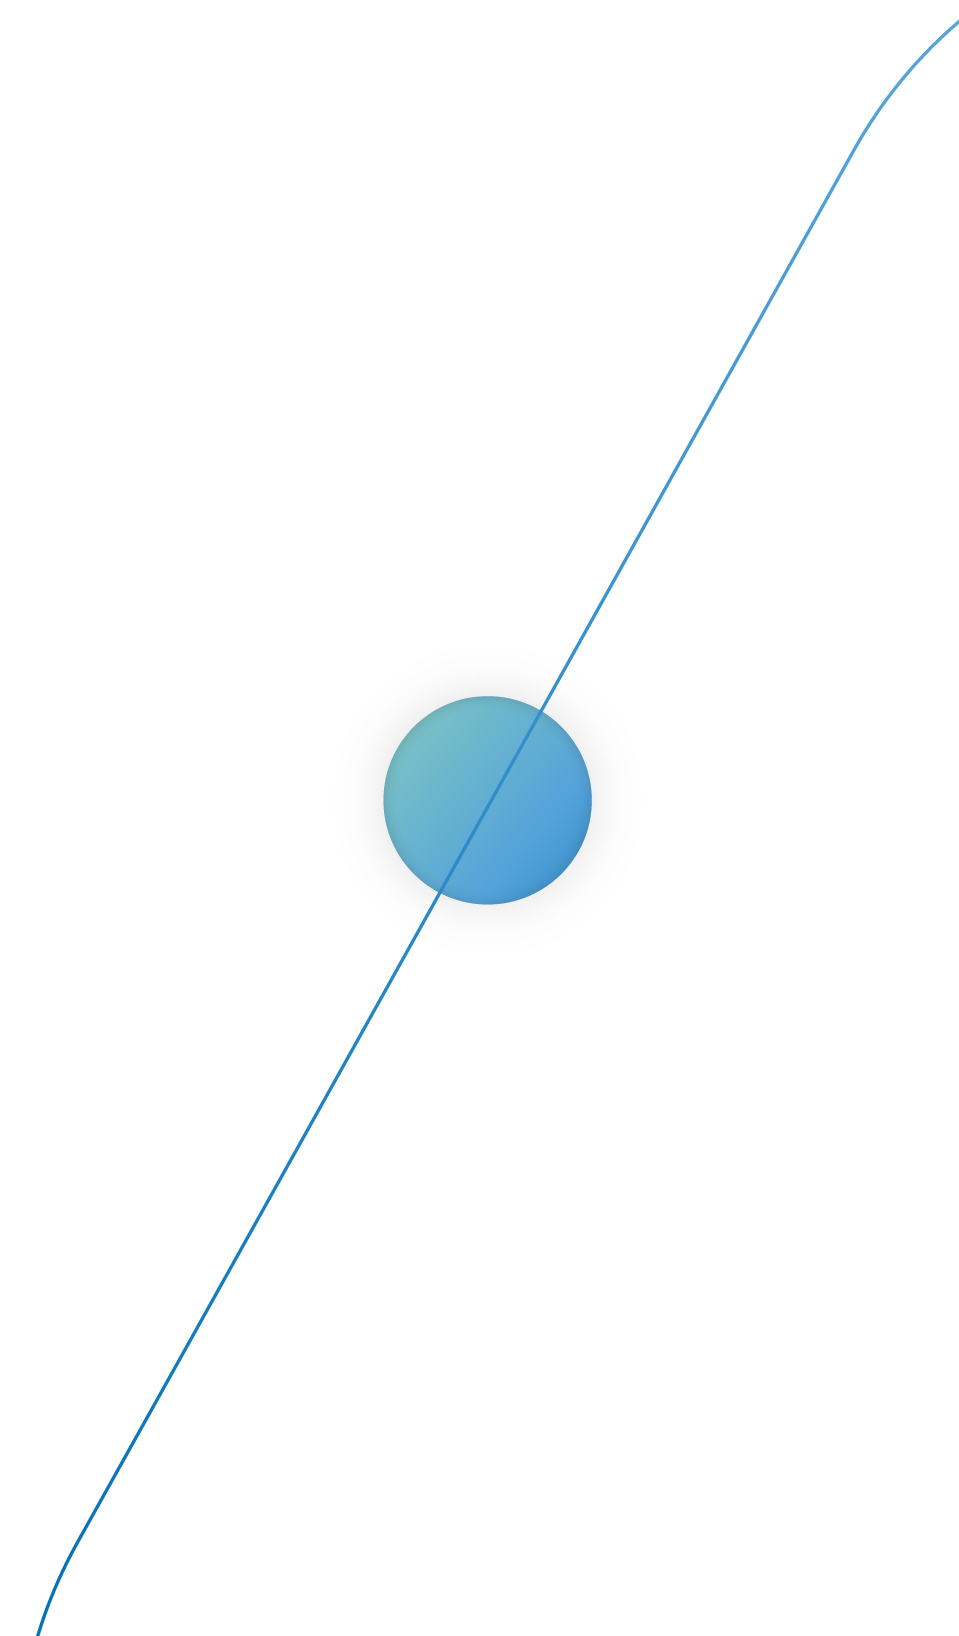 Circle in straight line